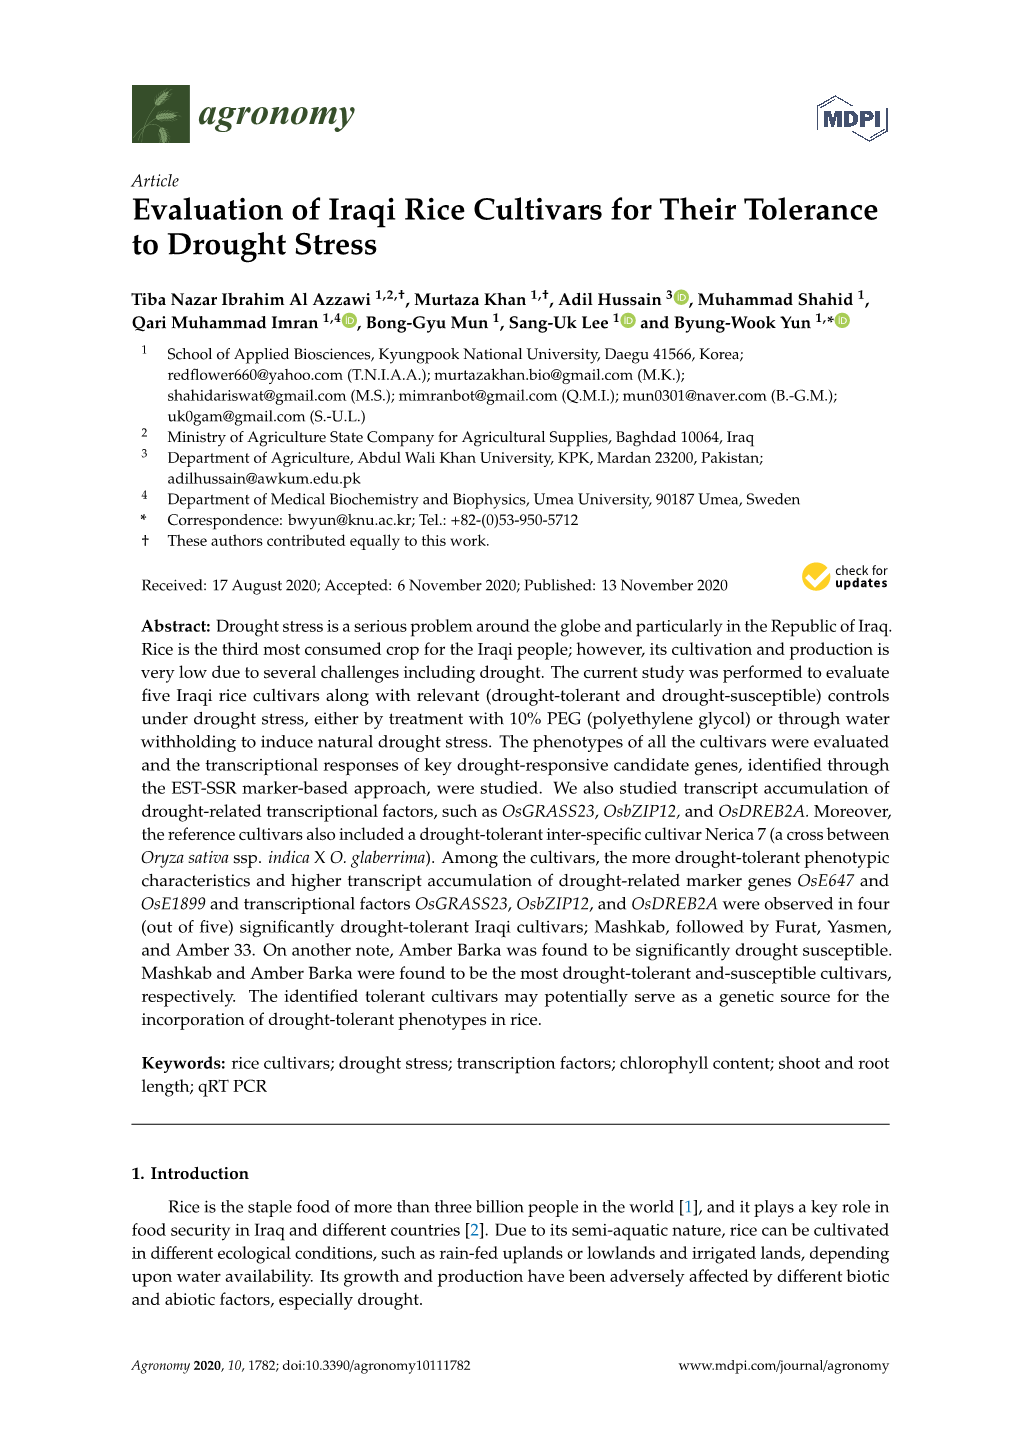 Evaluation of Iraqi Rice Cultivars for Their Tolerance to Drought Stress